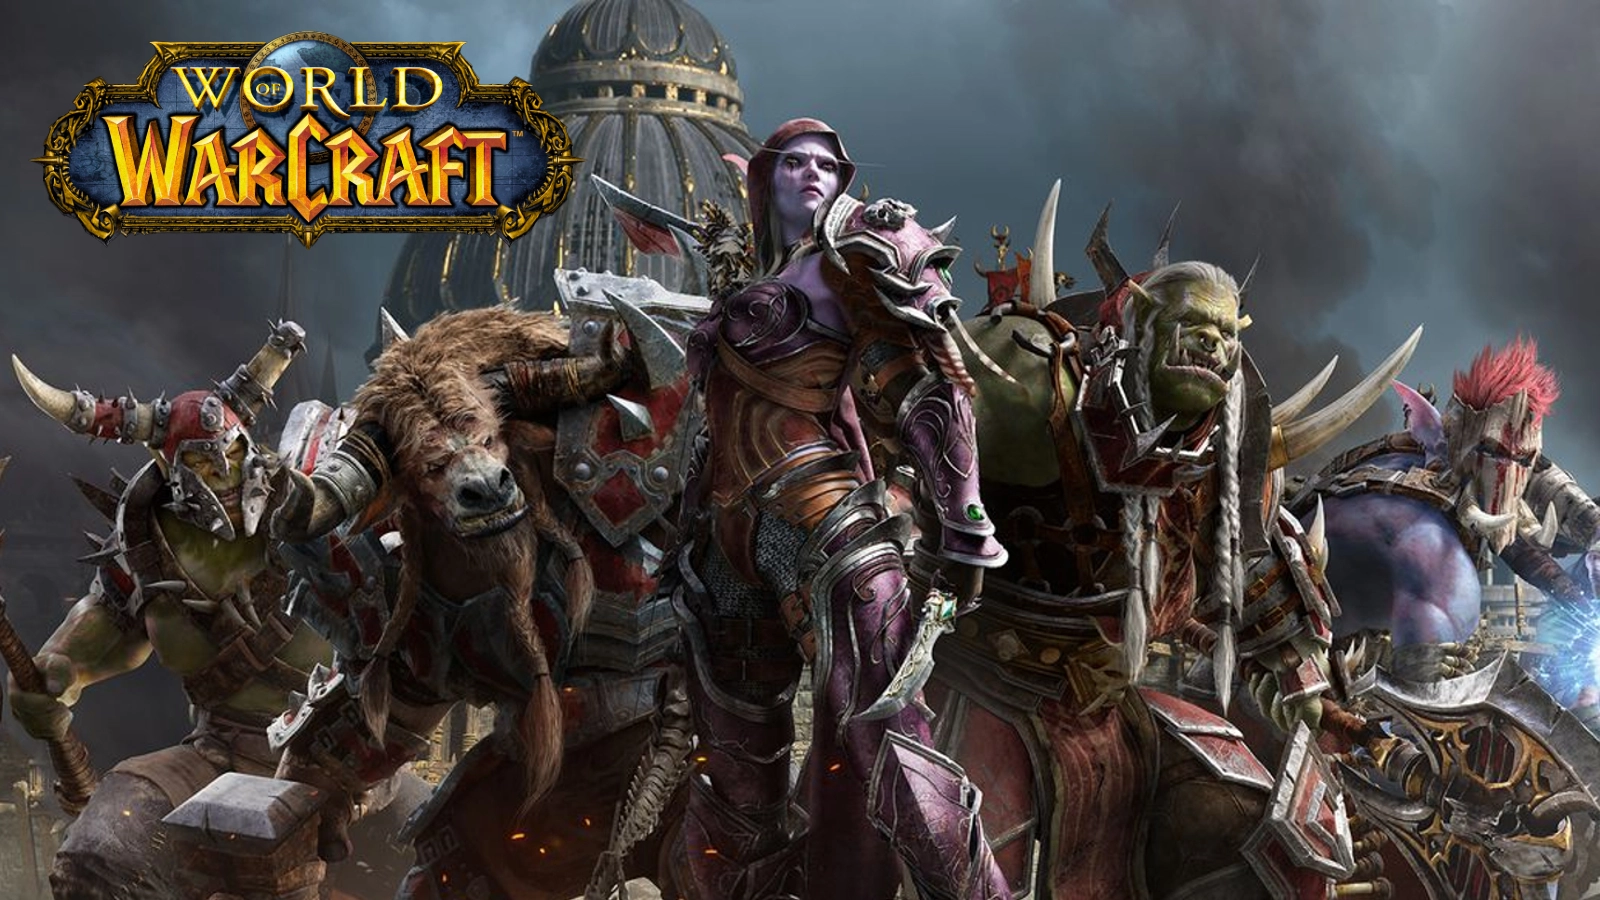 Is World of Warcraft dead?